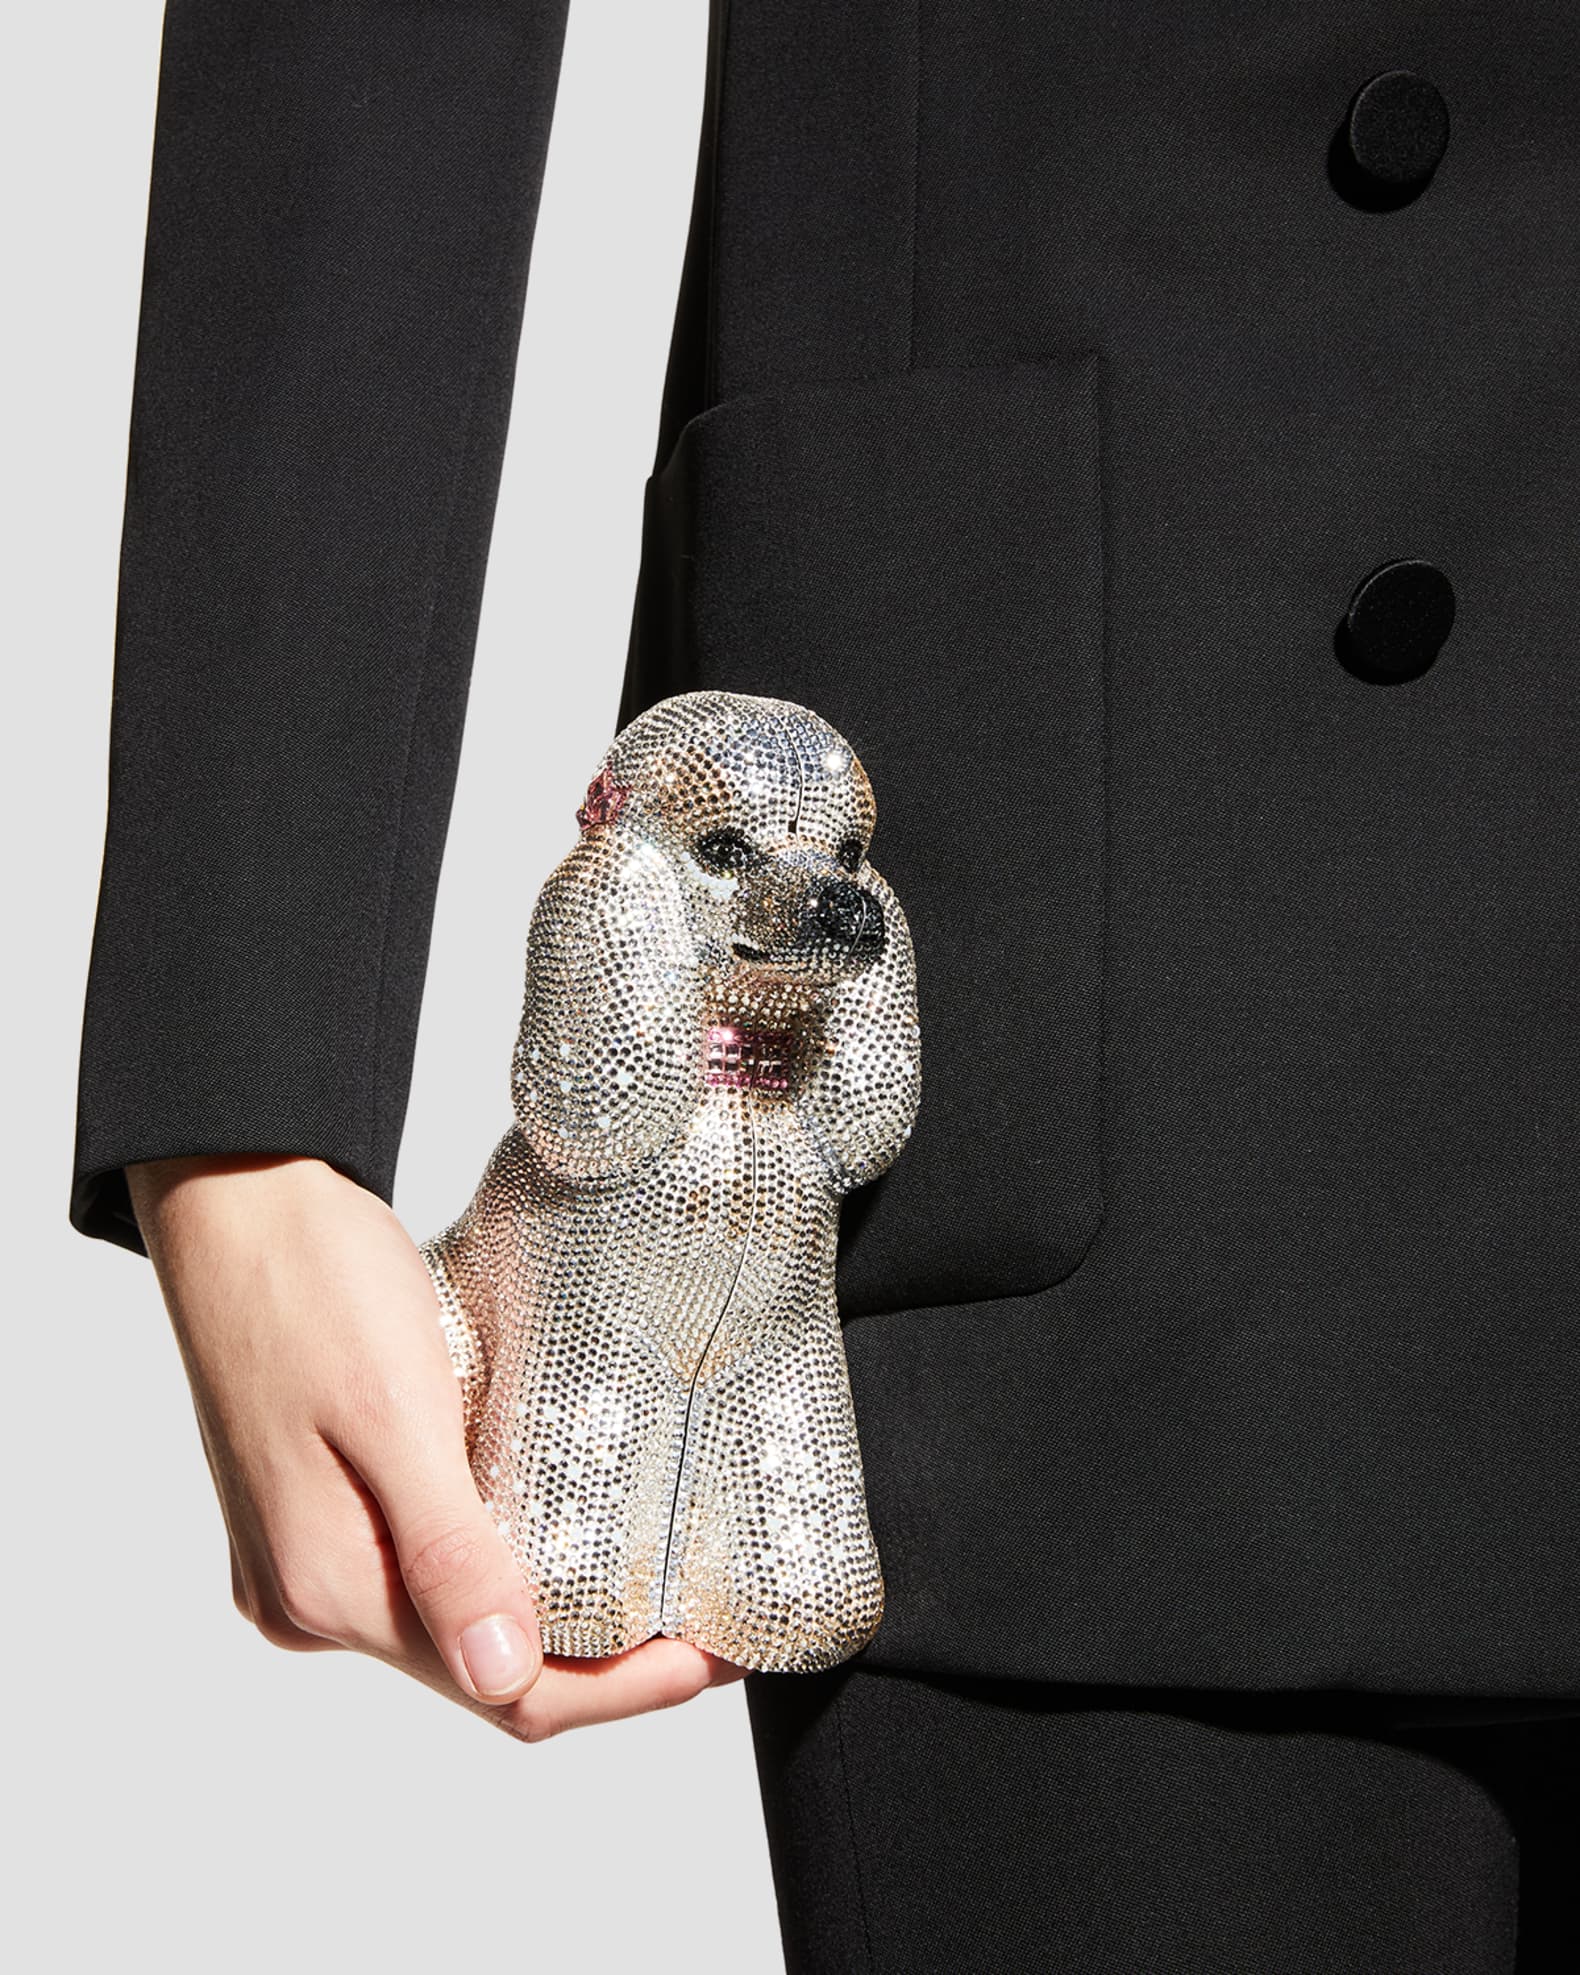 Judith Leiber French Poodle Fifi Clutch Bag